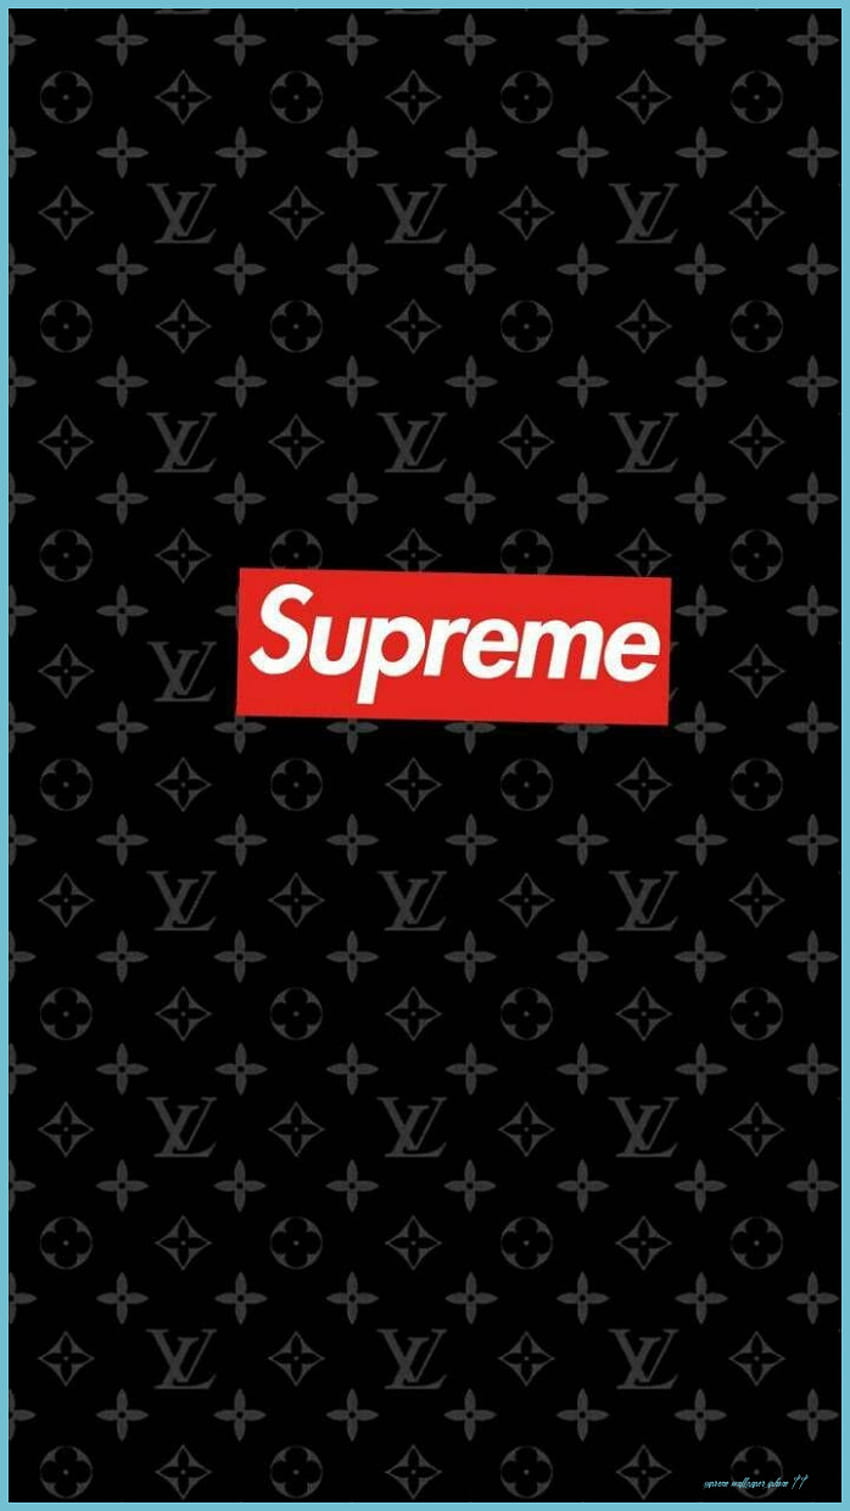 Pin by Patrick on wallpapers  Supreme wallpaper, Supreme iphone wallpaper,  Supreme